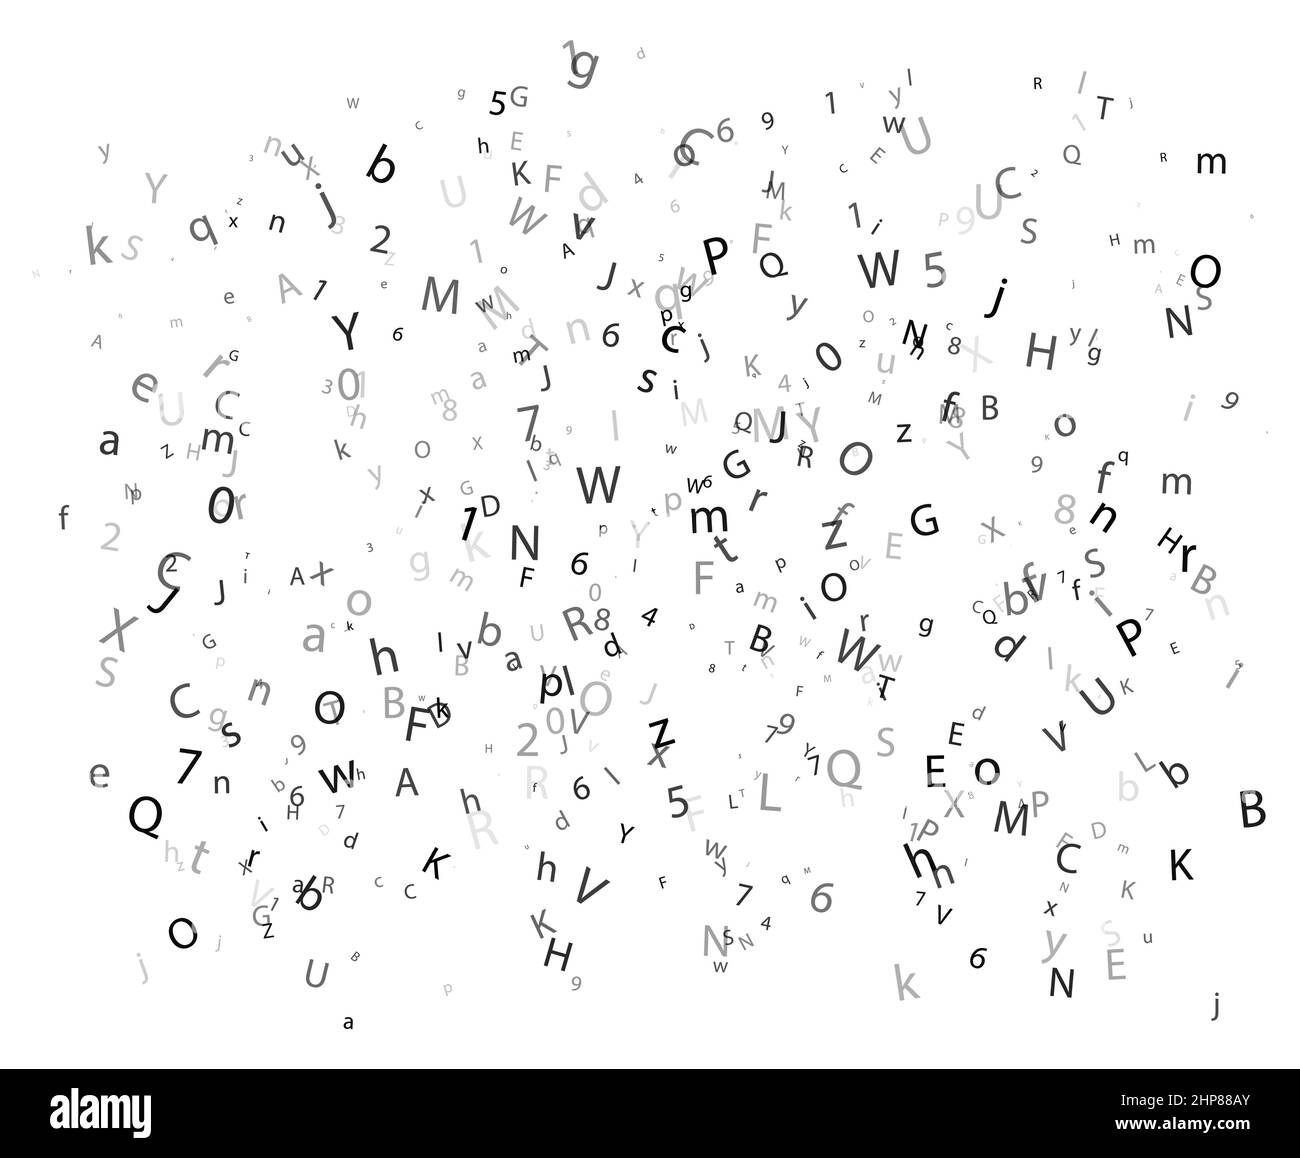 Abstract black alphabet ornament border isolated on white background. Vector illustration for education, writing, poetic design. Random letters fall from top. Alphabet book concept for grammar school. Stock Vector